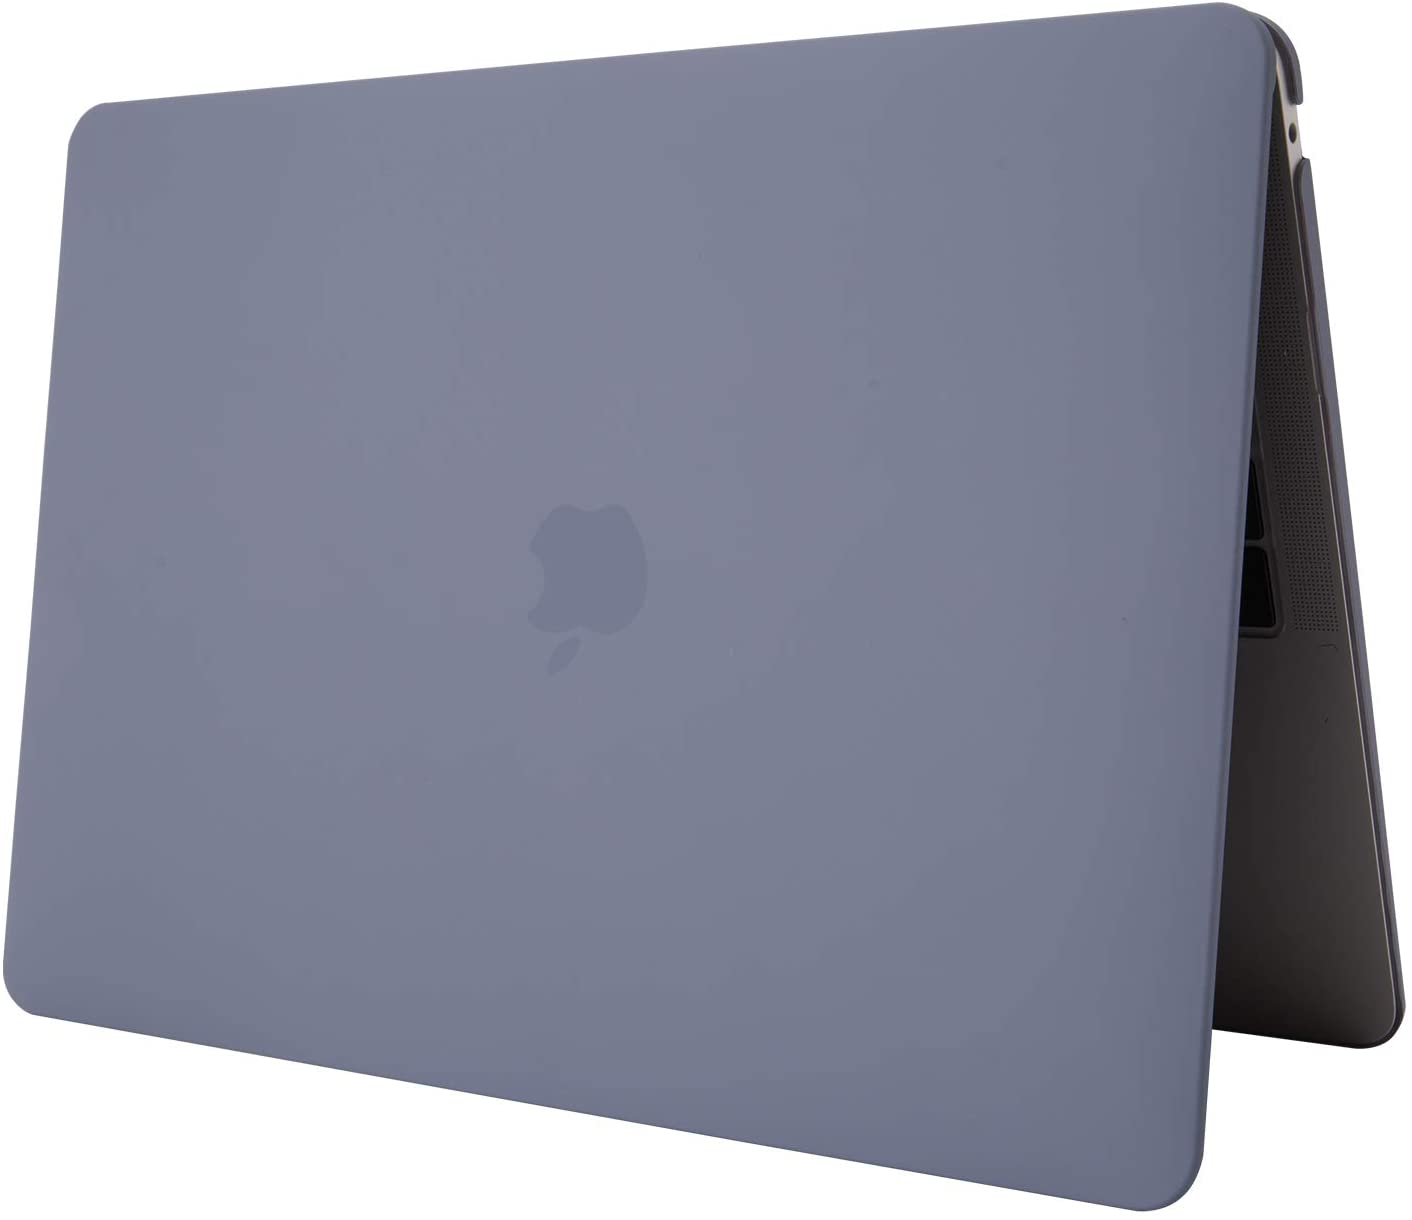 Matte Case Cover for Macbook Air 13 inch M1 A2337 / A2179 Touch ID 2020 (lavender grey)